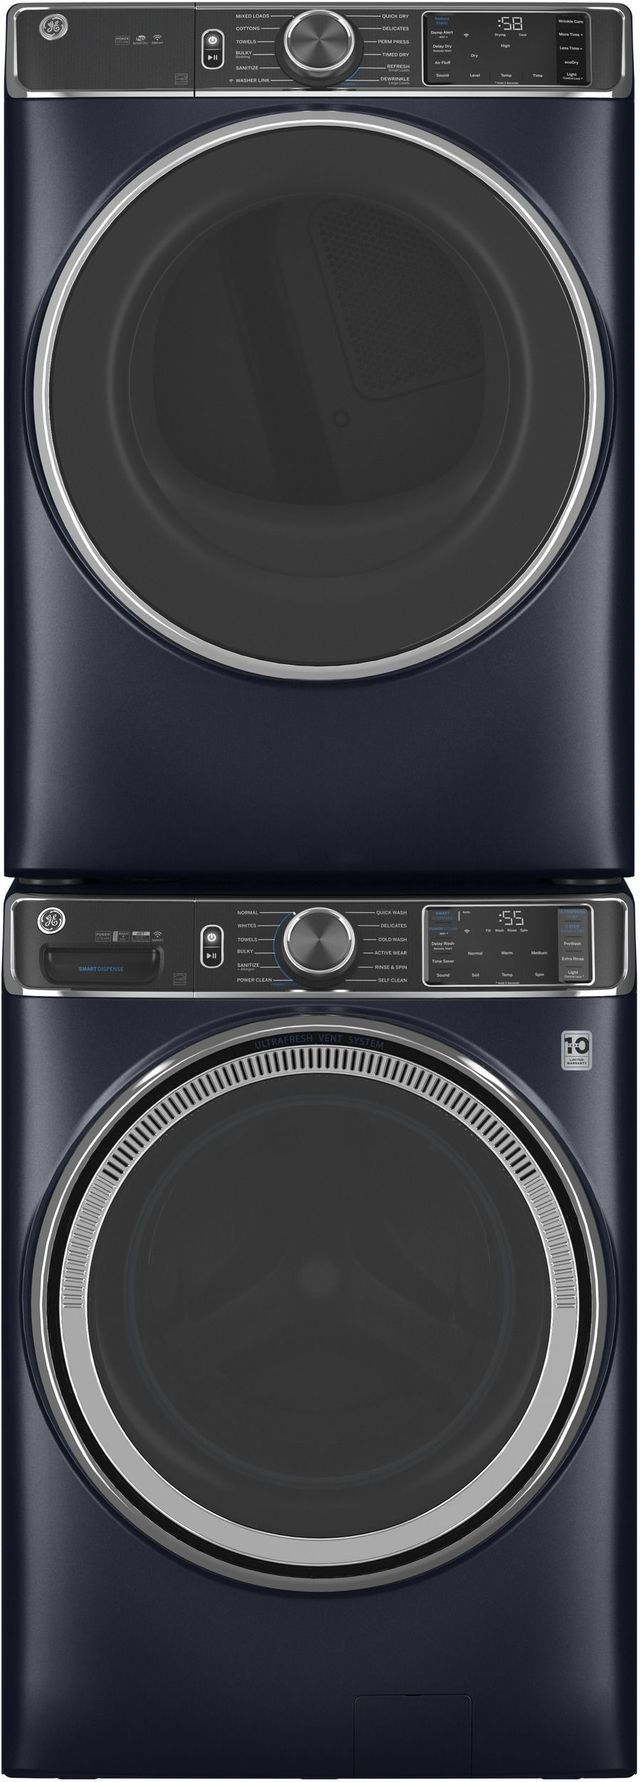 GE 850 Series Royal Sapphire Front Load Washer & Electric Dryer Package w/ Pedestals-2